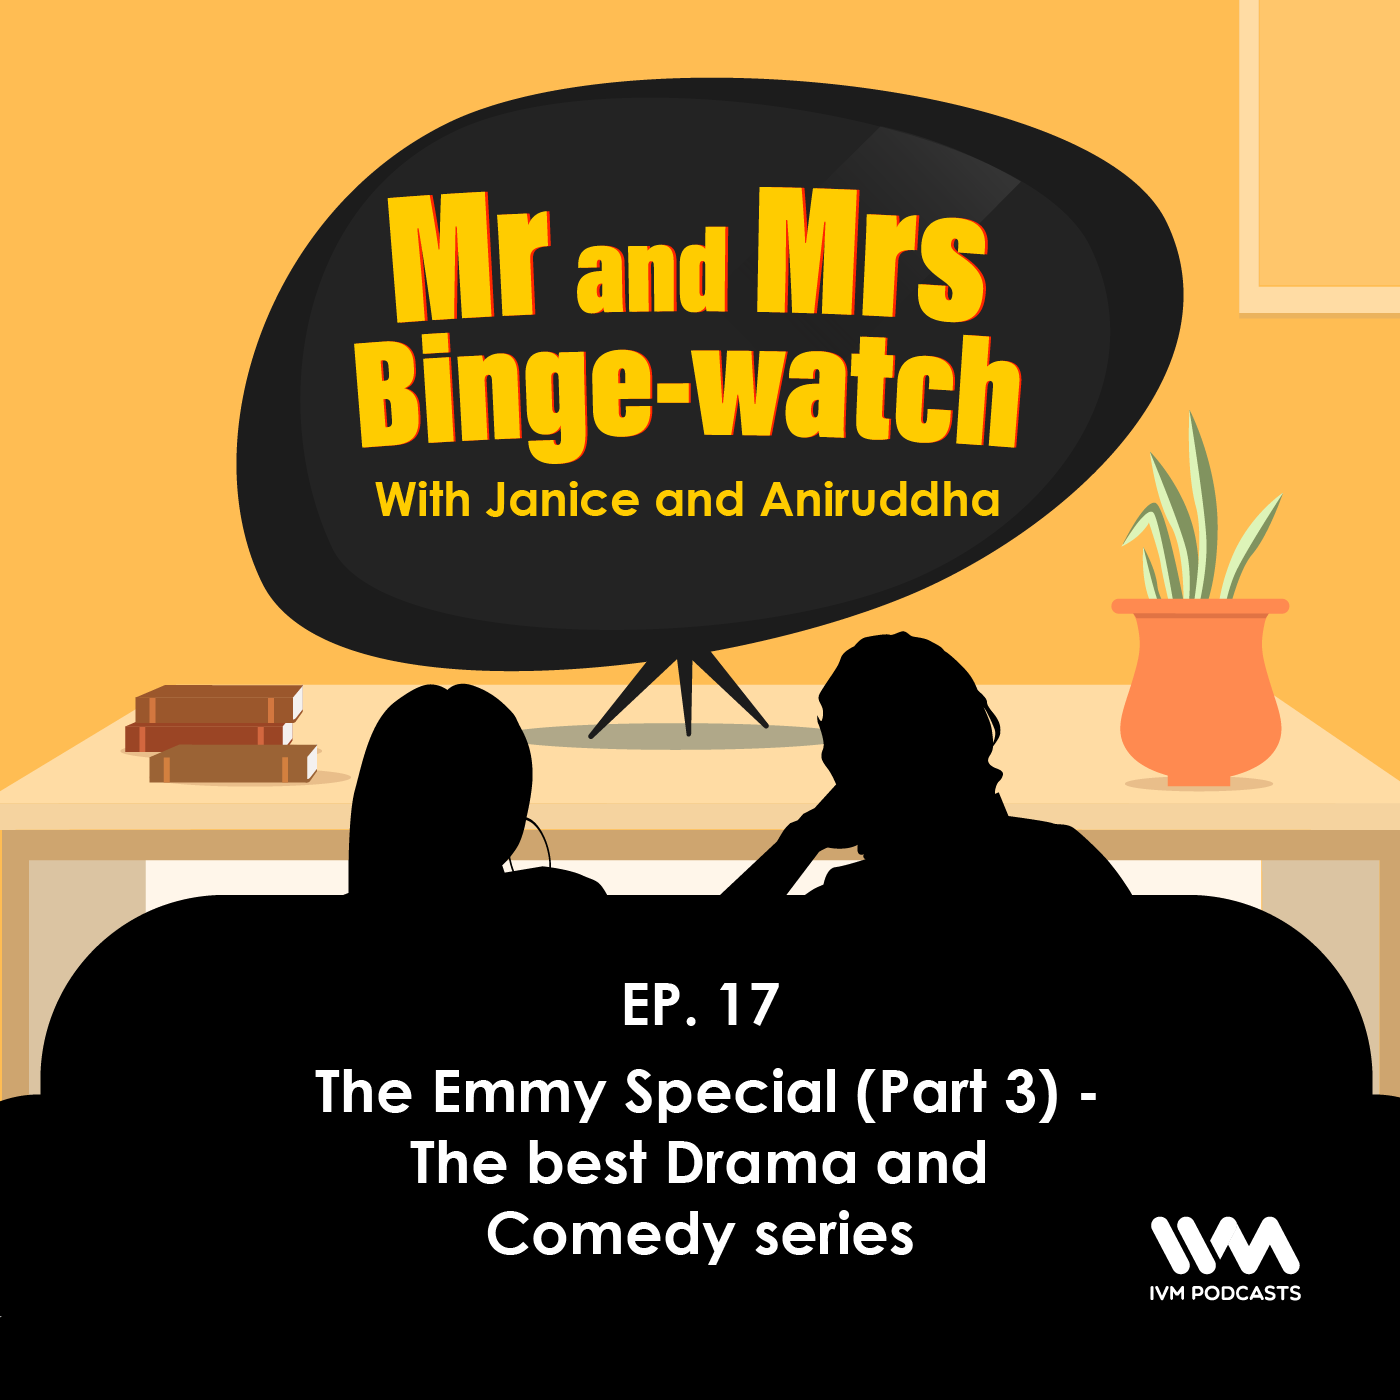 Ep. 17: The Emmy Special (Part 3) - The best Drama and Comedy series